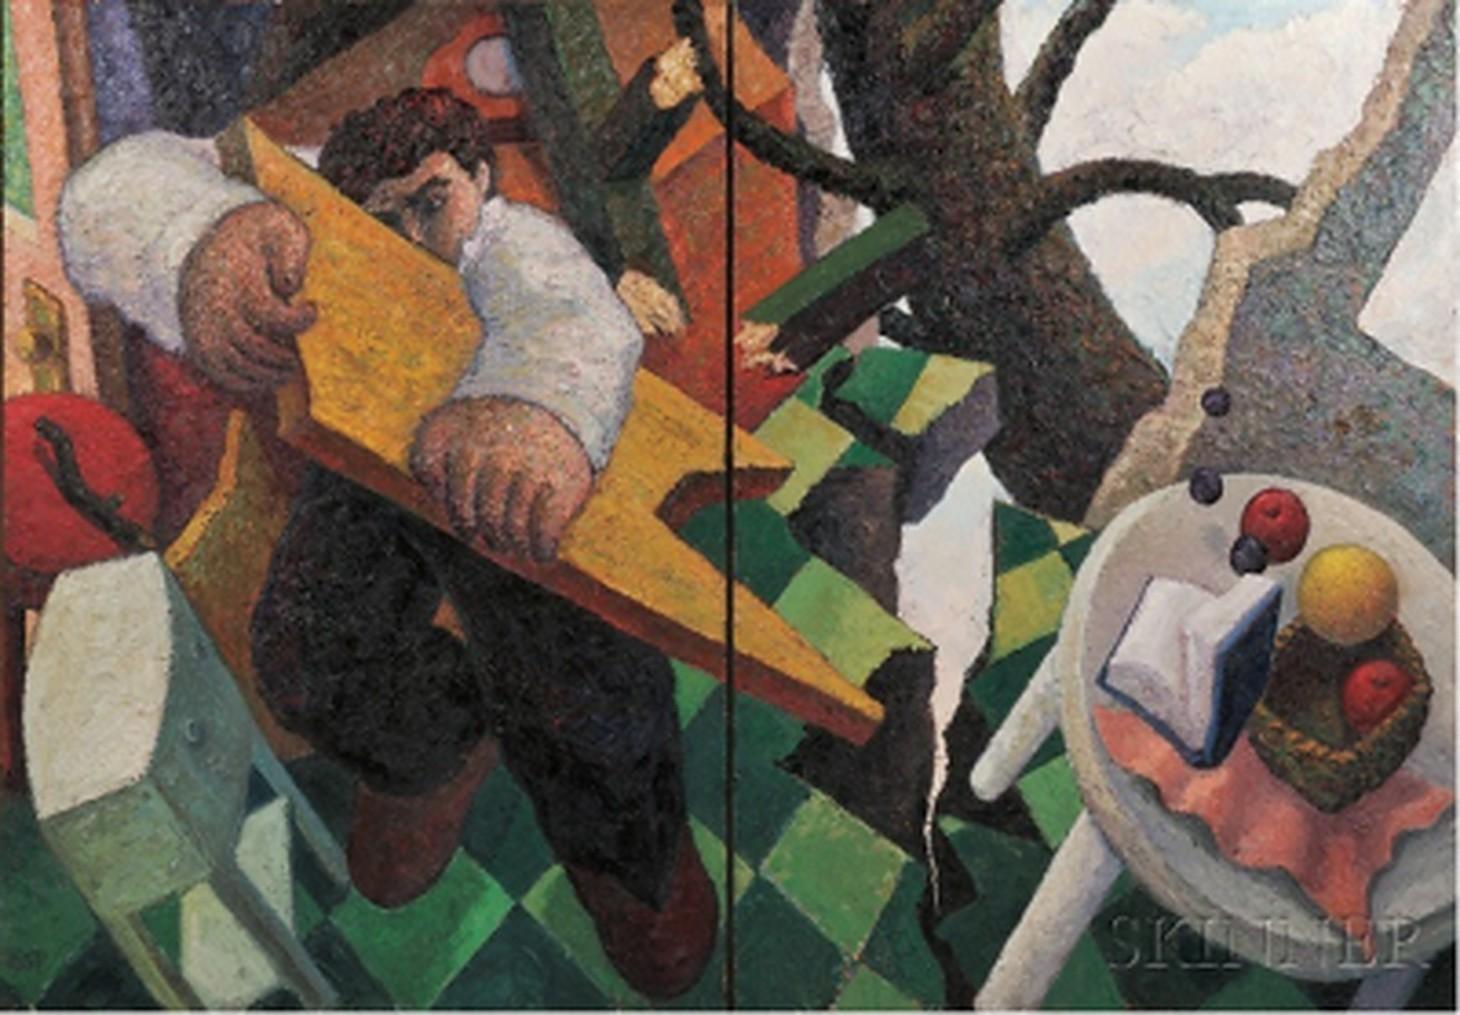 Robert Jessup Figurative Painting - Kitchen Disaster (The Kitchen Destroyed) (diptych), 1995